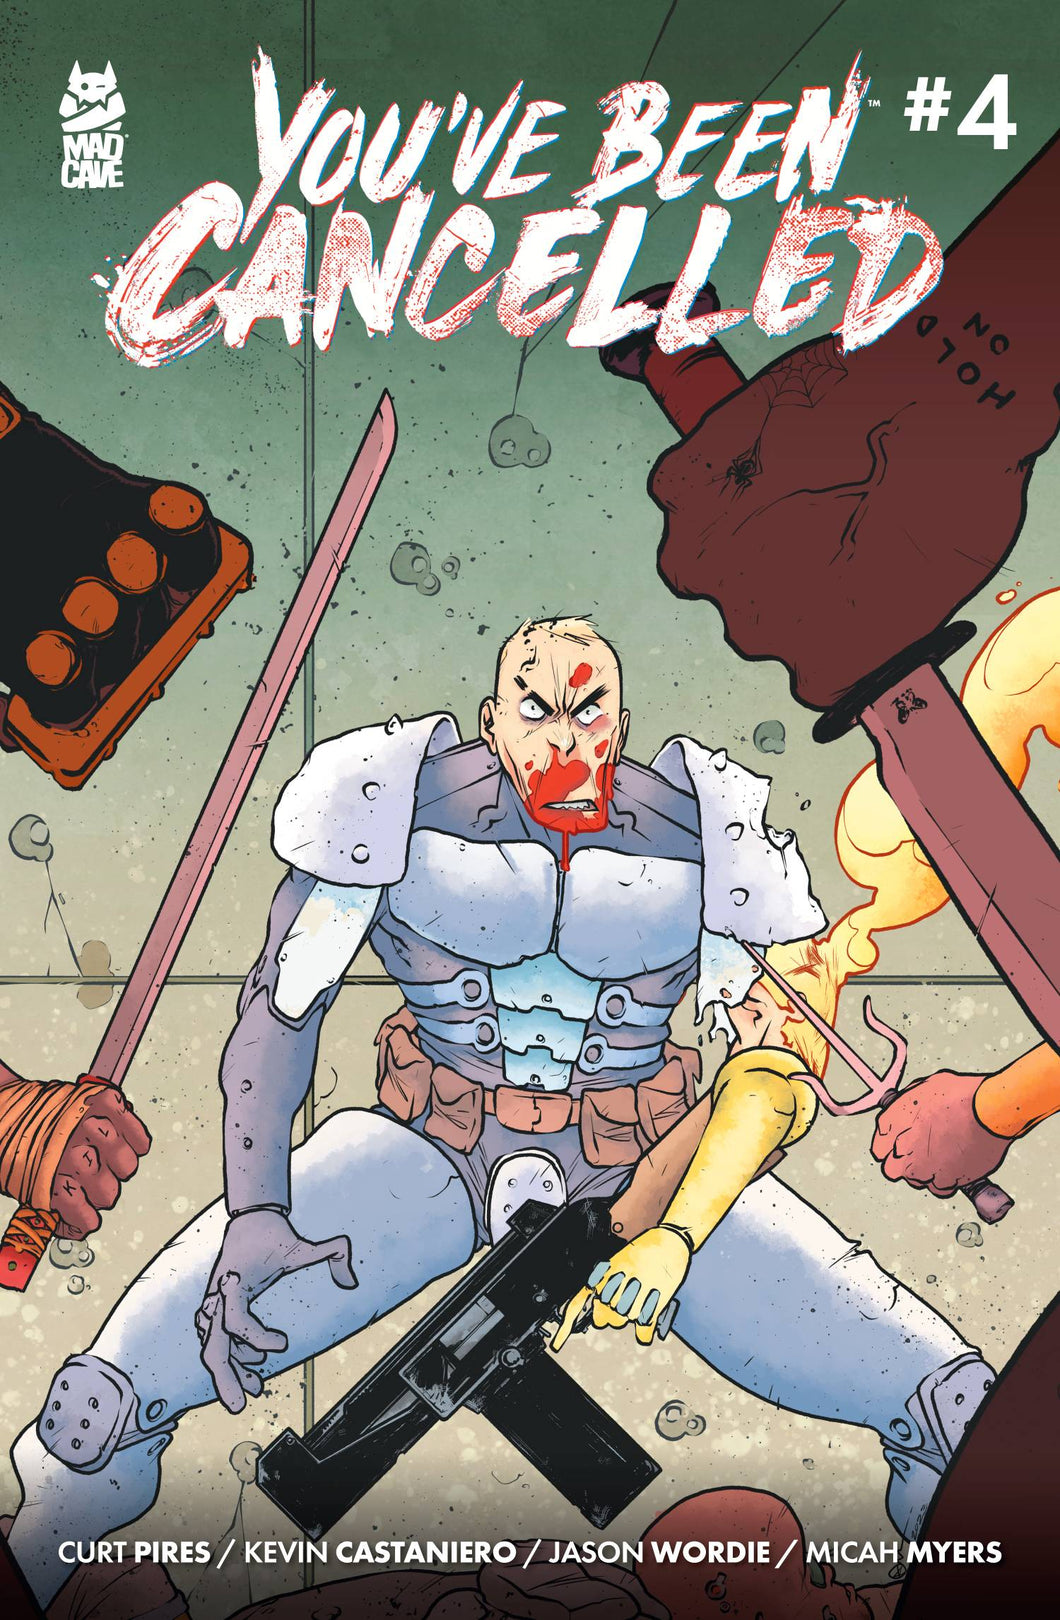 YOUVE BEEN CANCELLED #4 (OF 4)